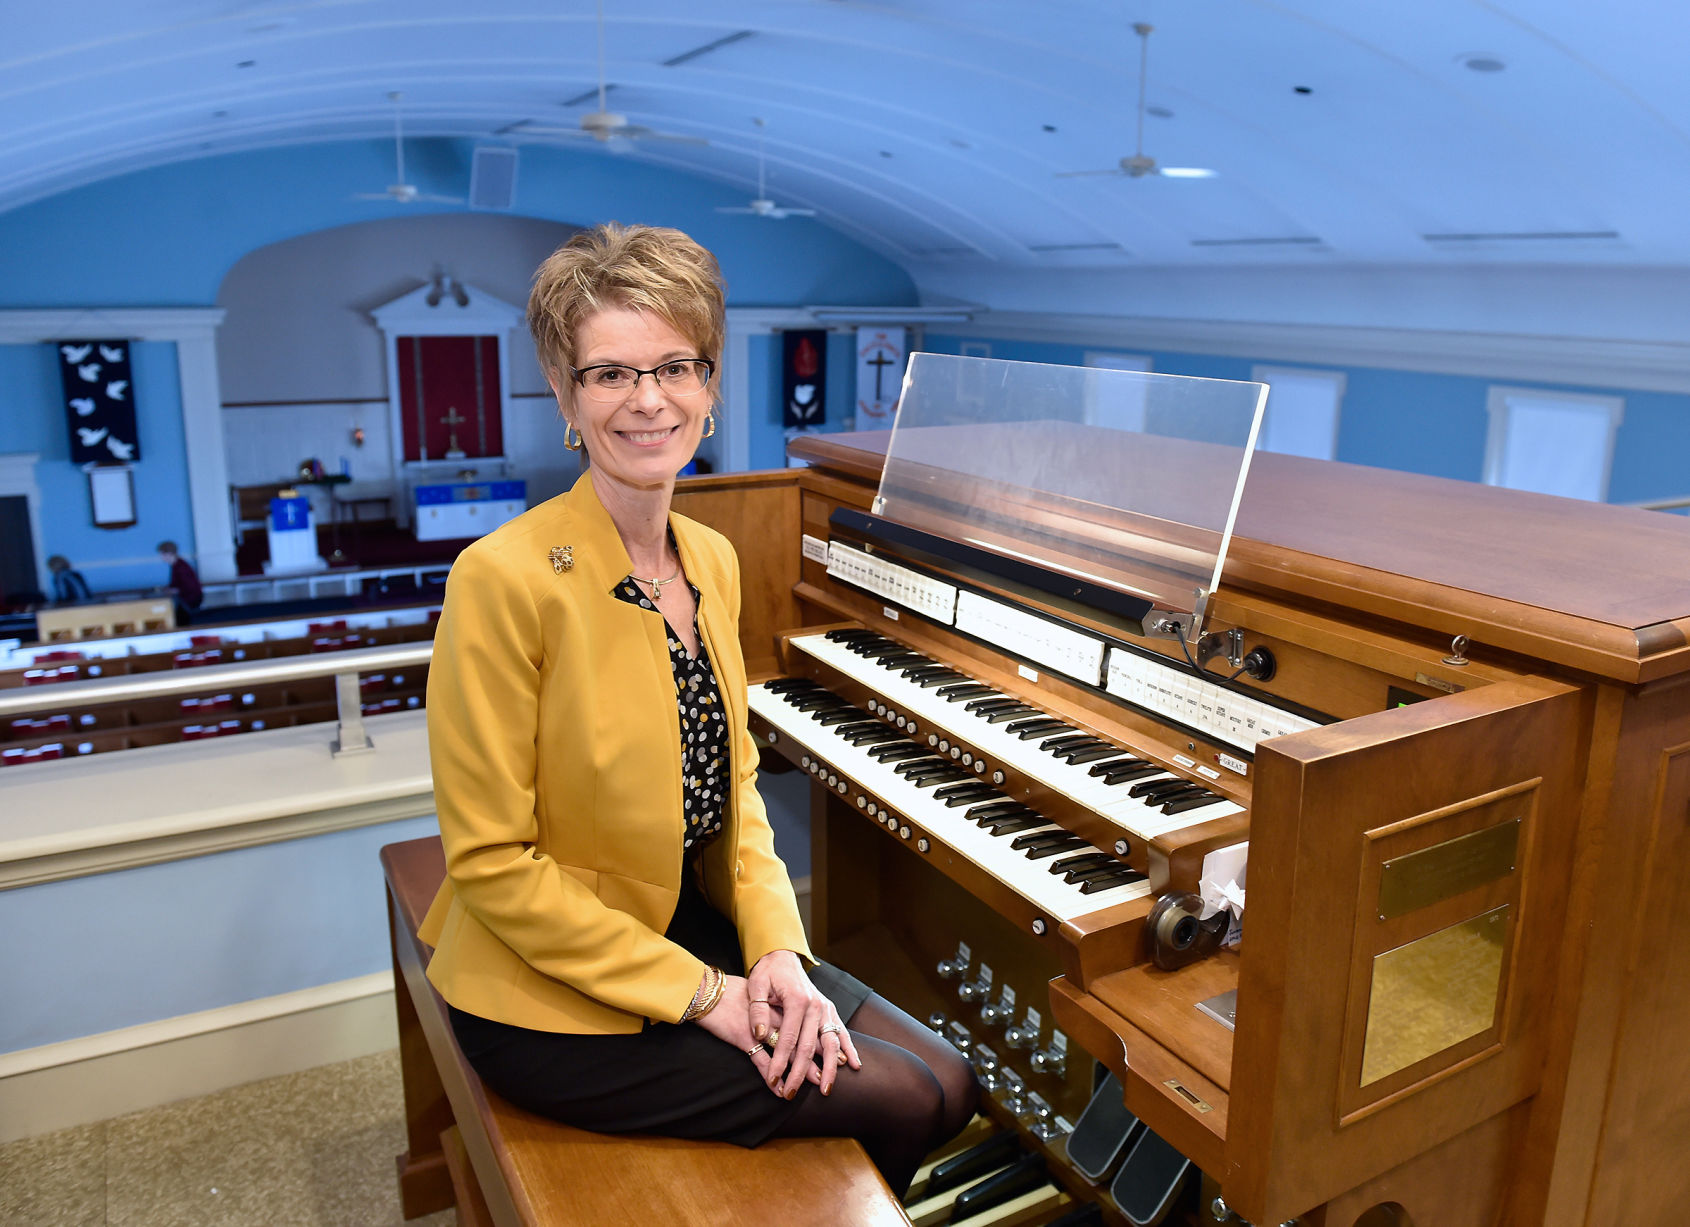 For 40 years, Linda Binder has provided the soundtrack for New Hollands Trinity Lutheran Church Life and Culture lancasteronline picture